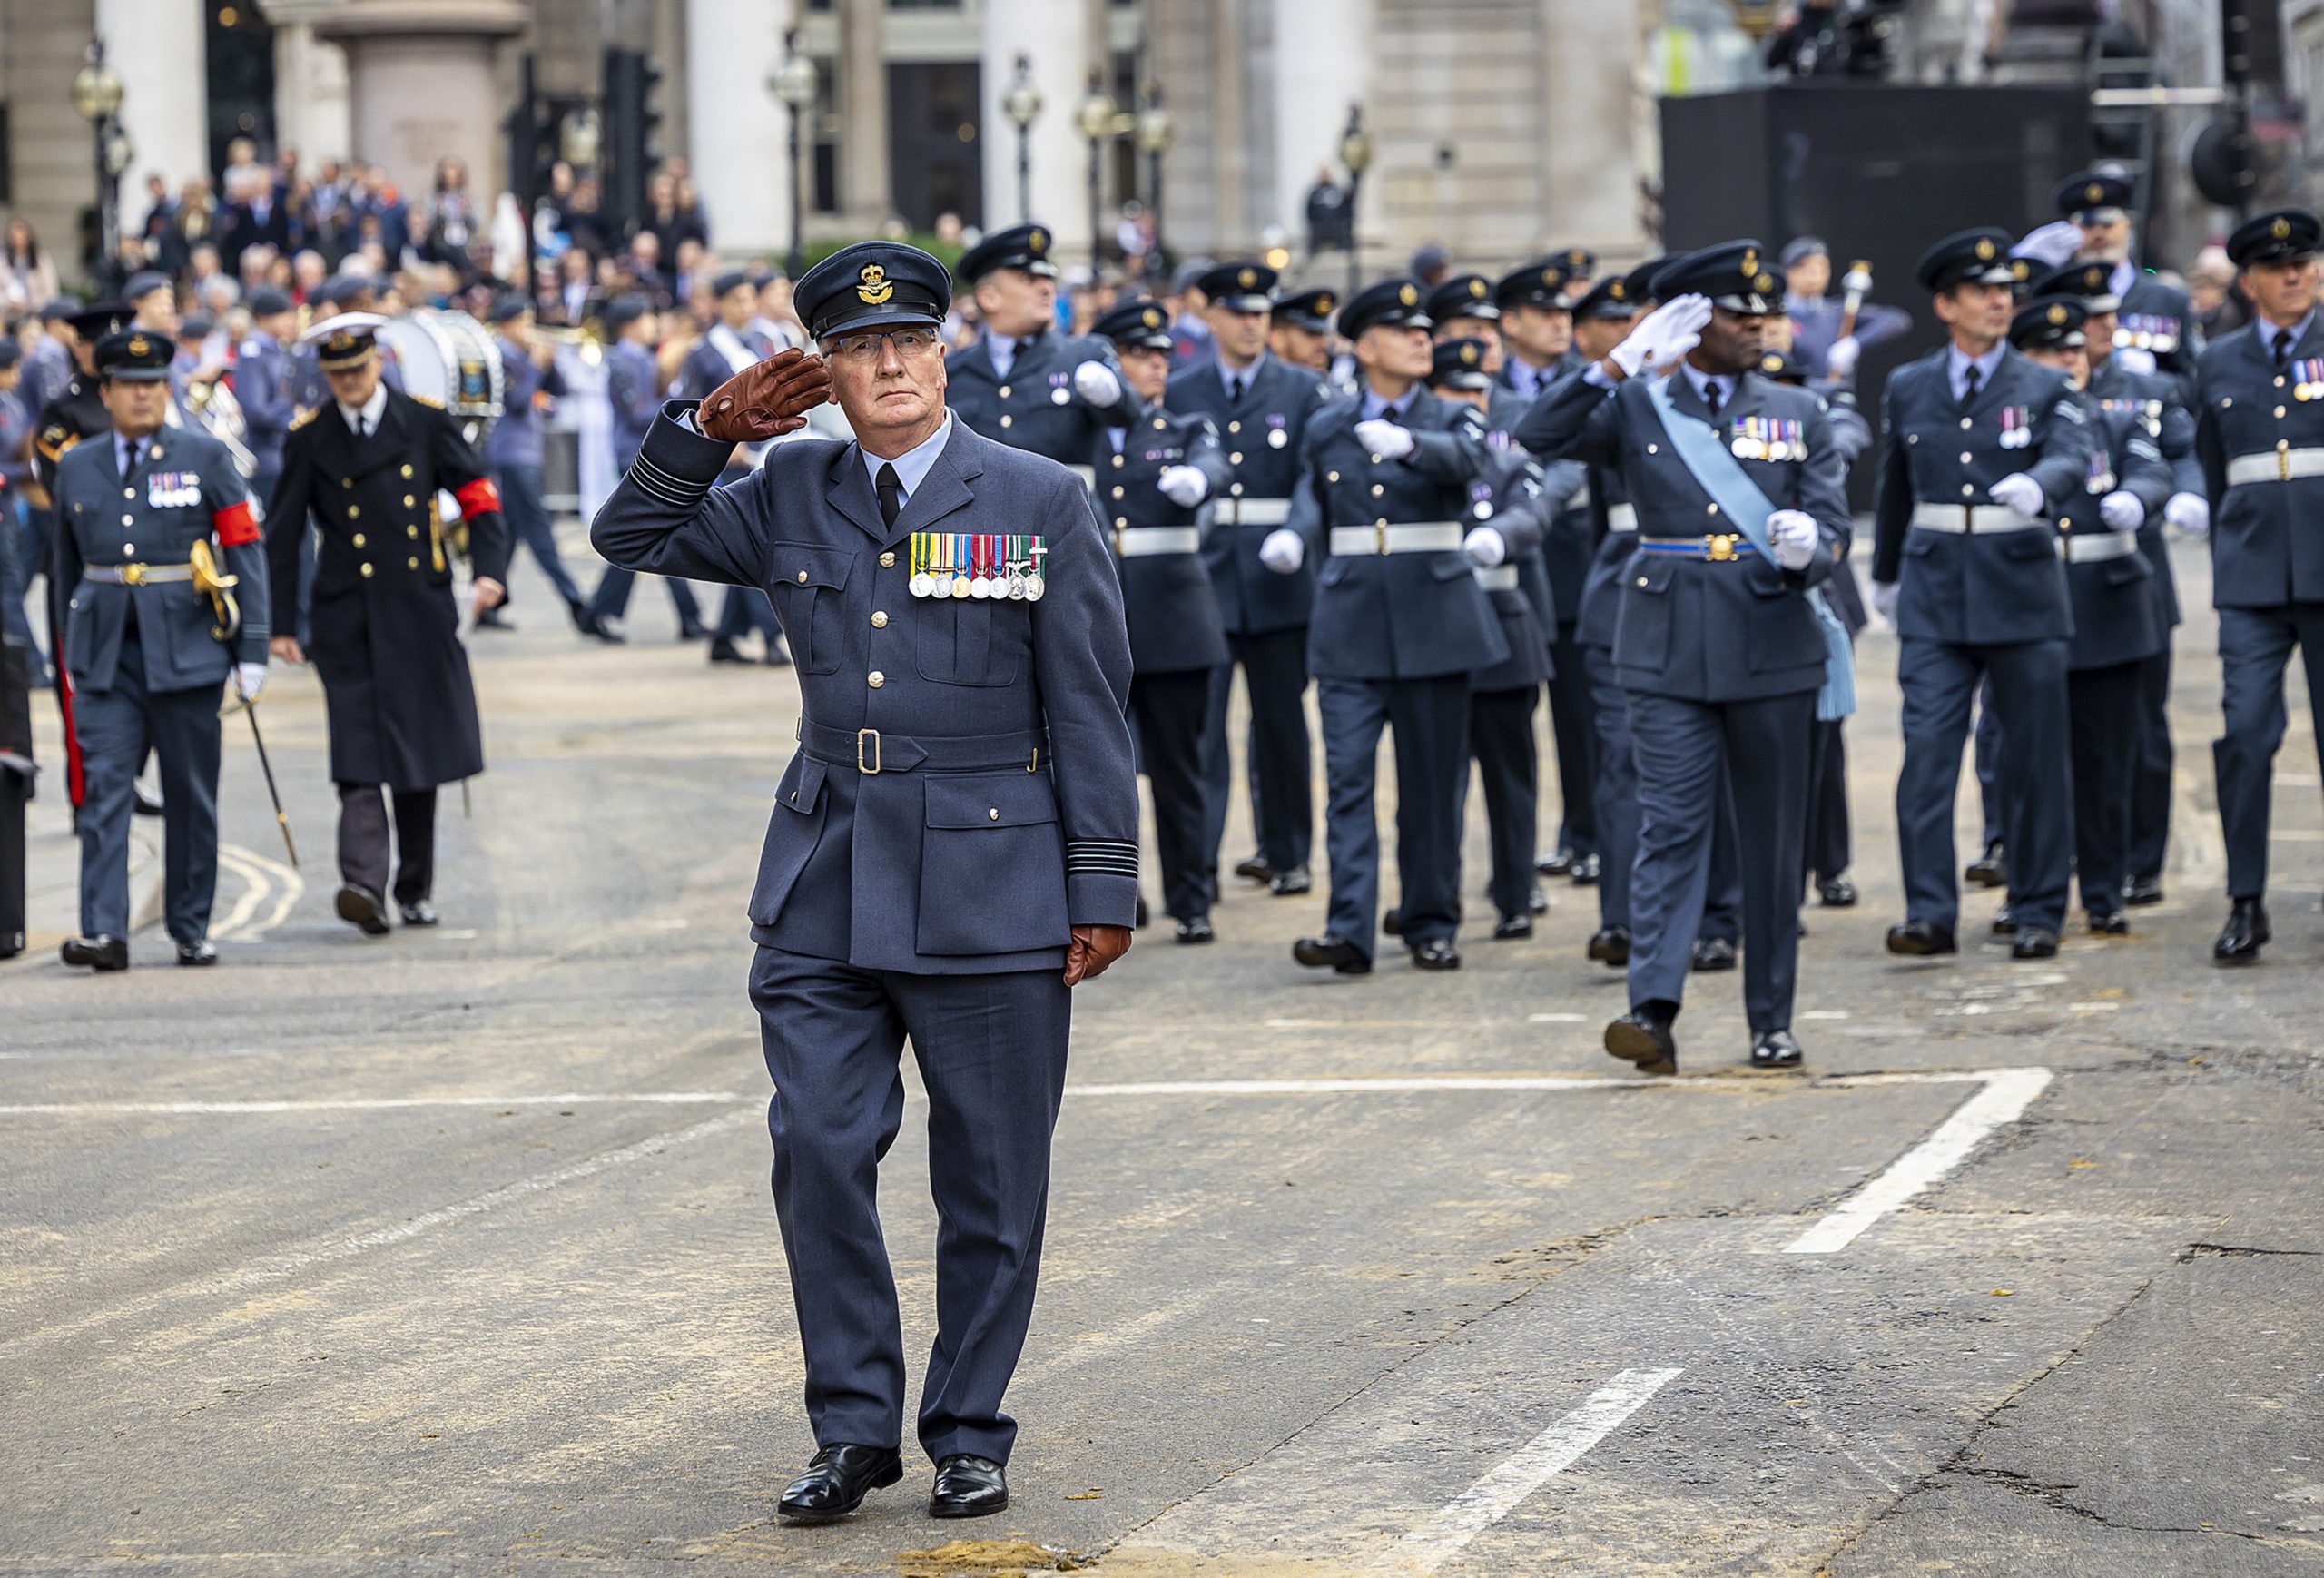 RAF Reserves during the Lord Mayor's Show 2022